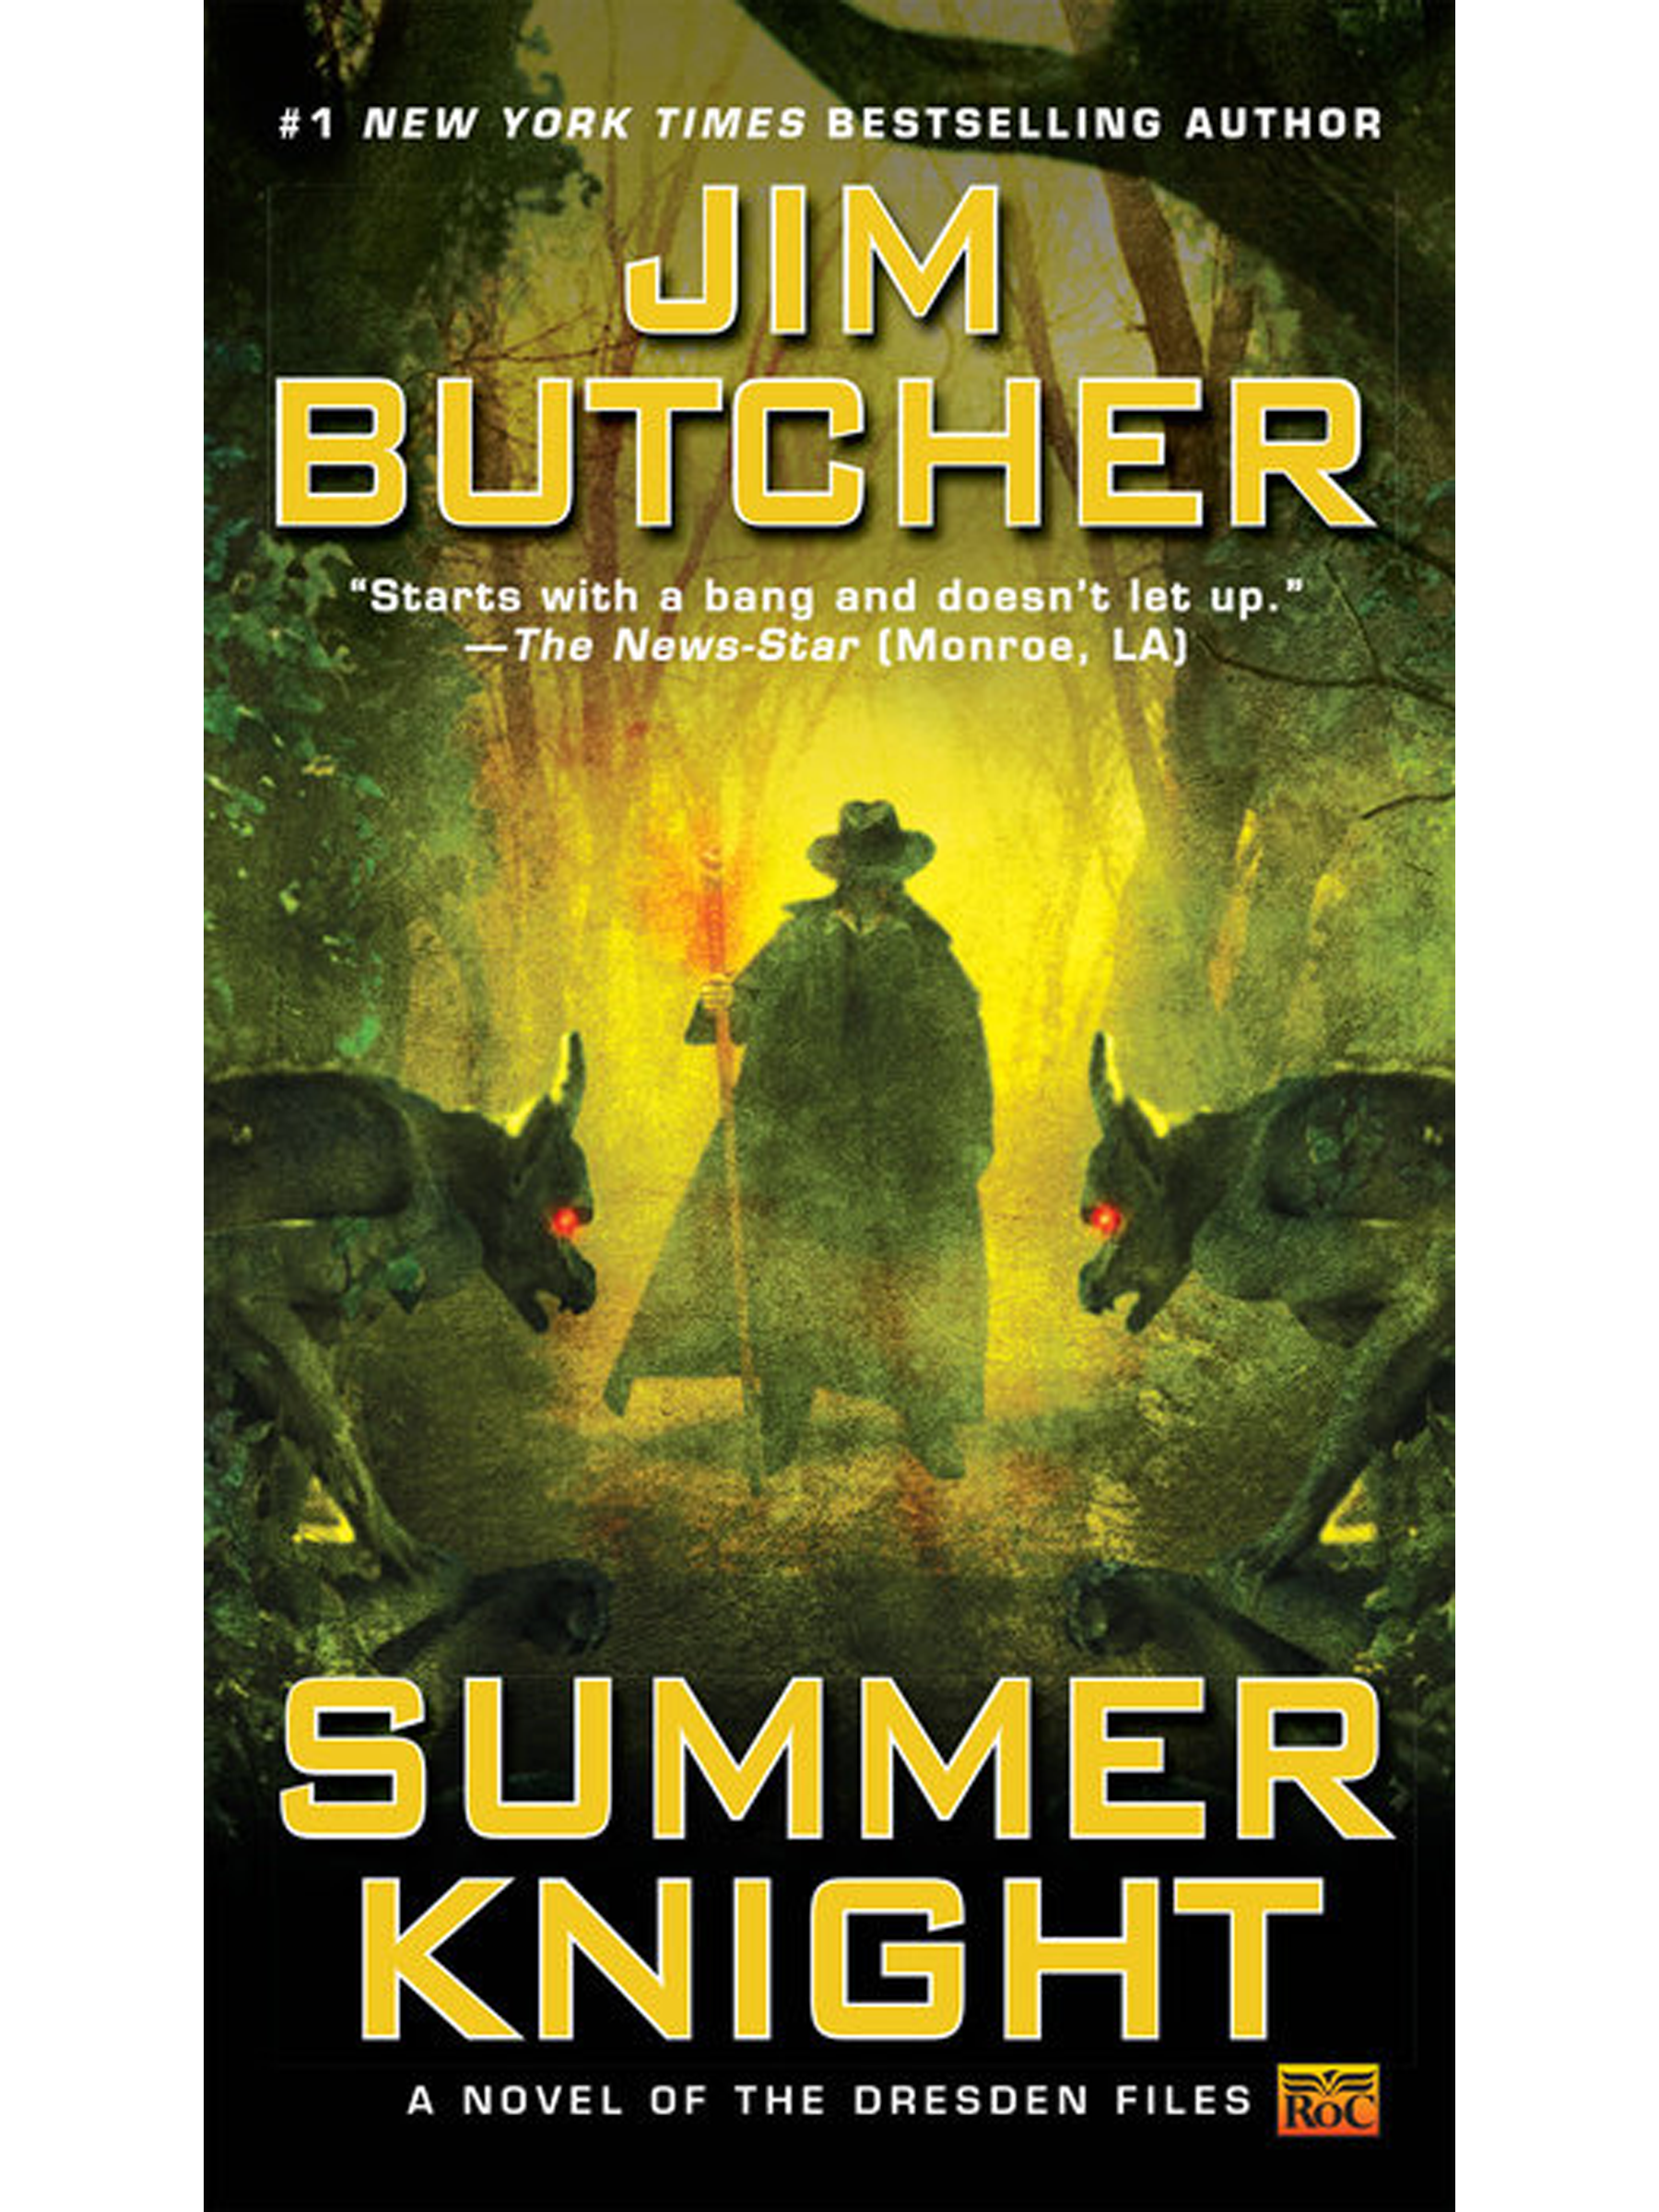 Summer Knight by Jim Butcher.png